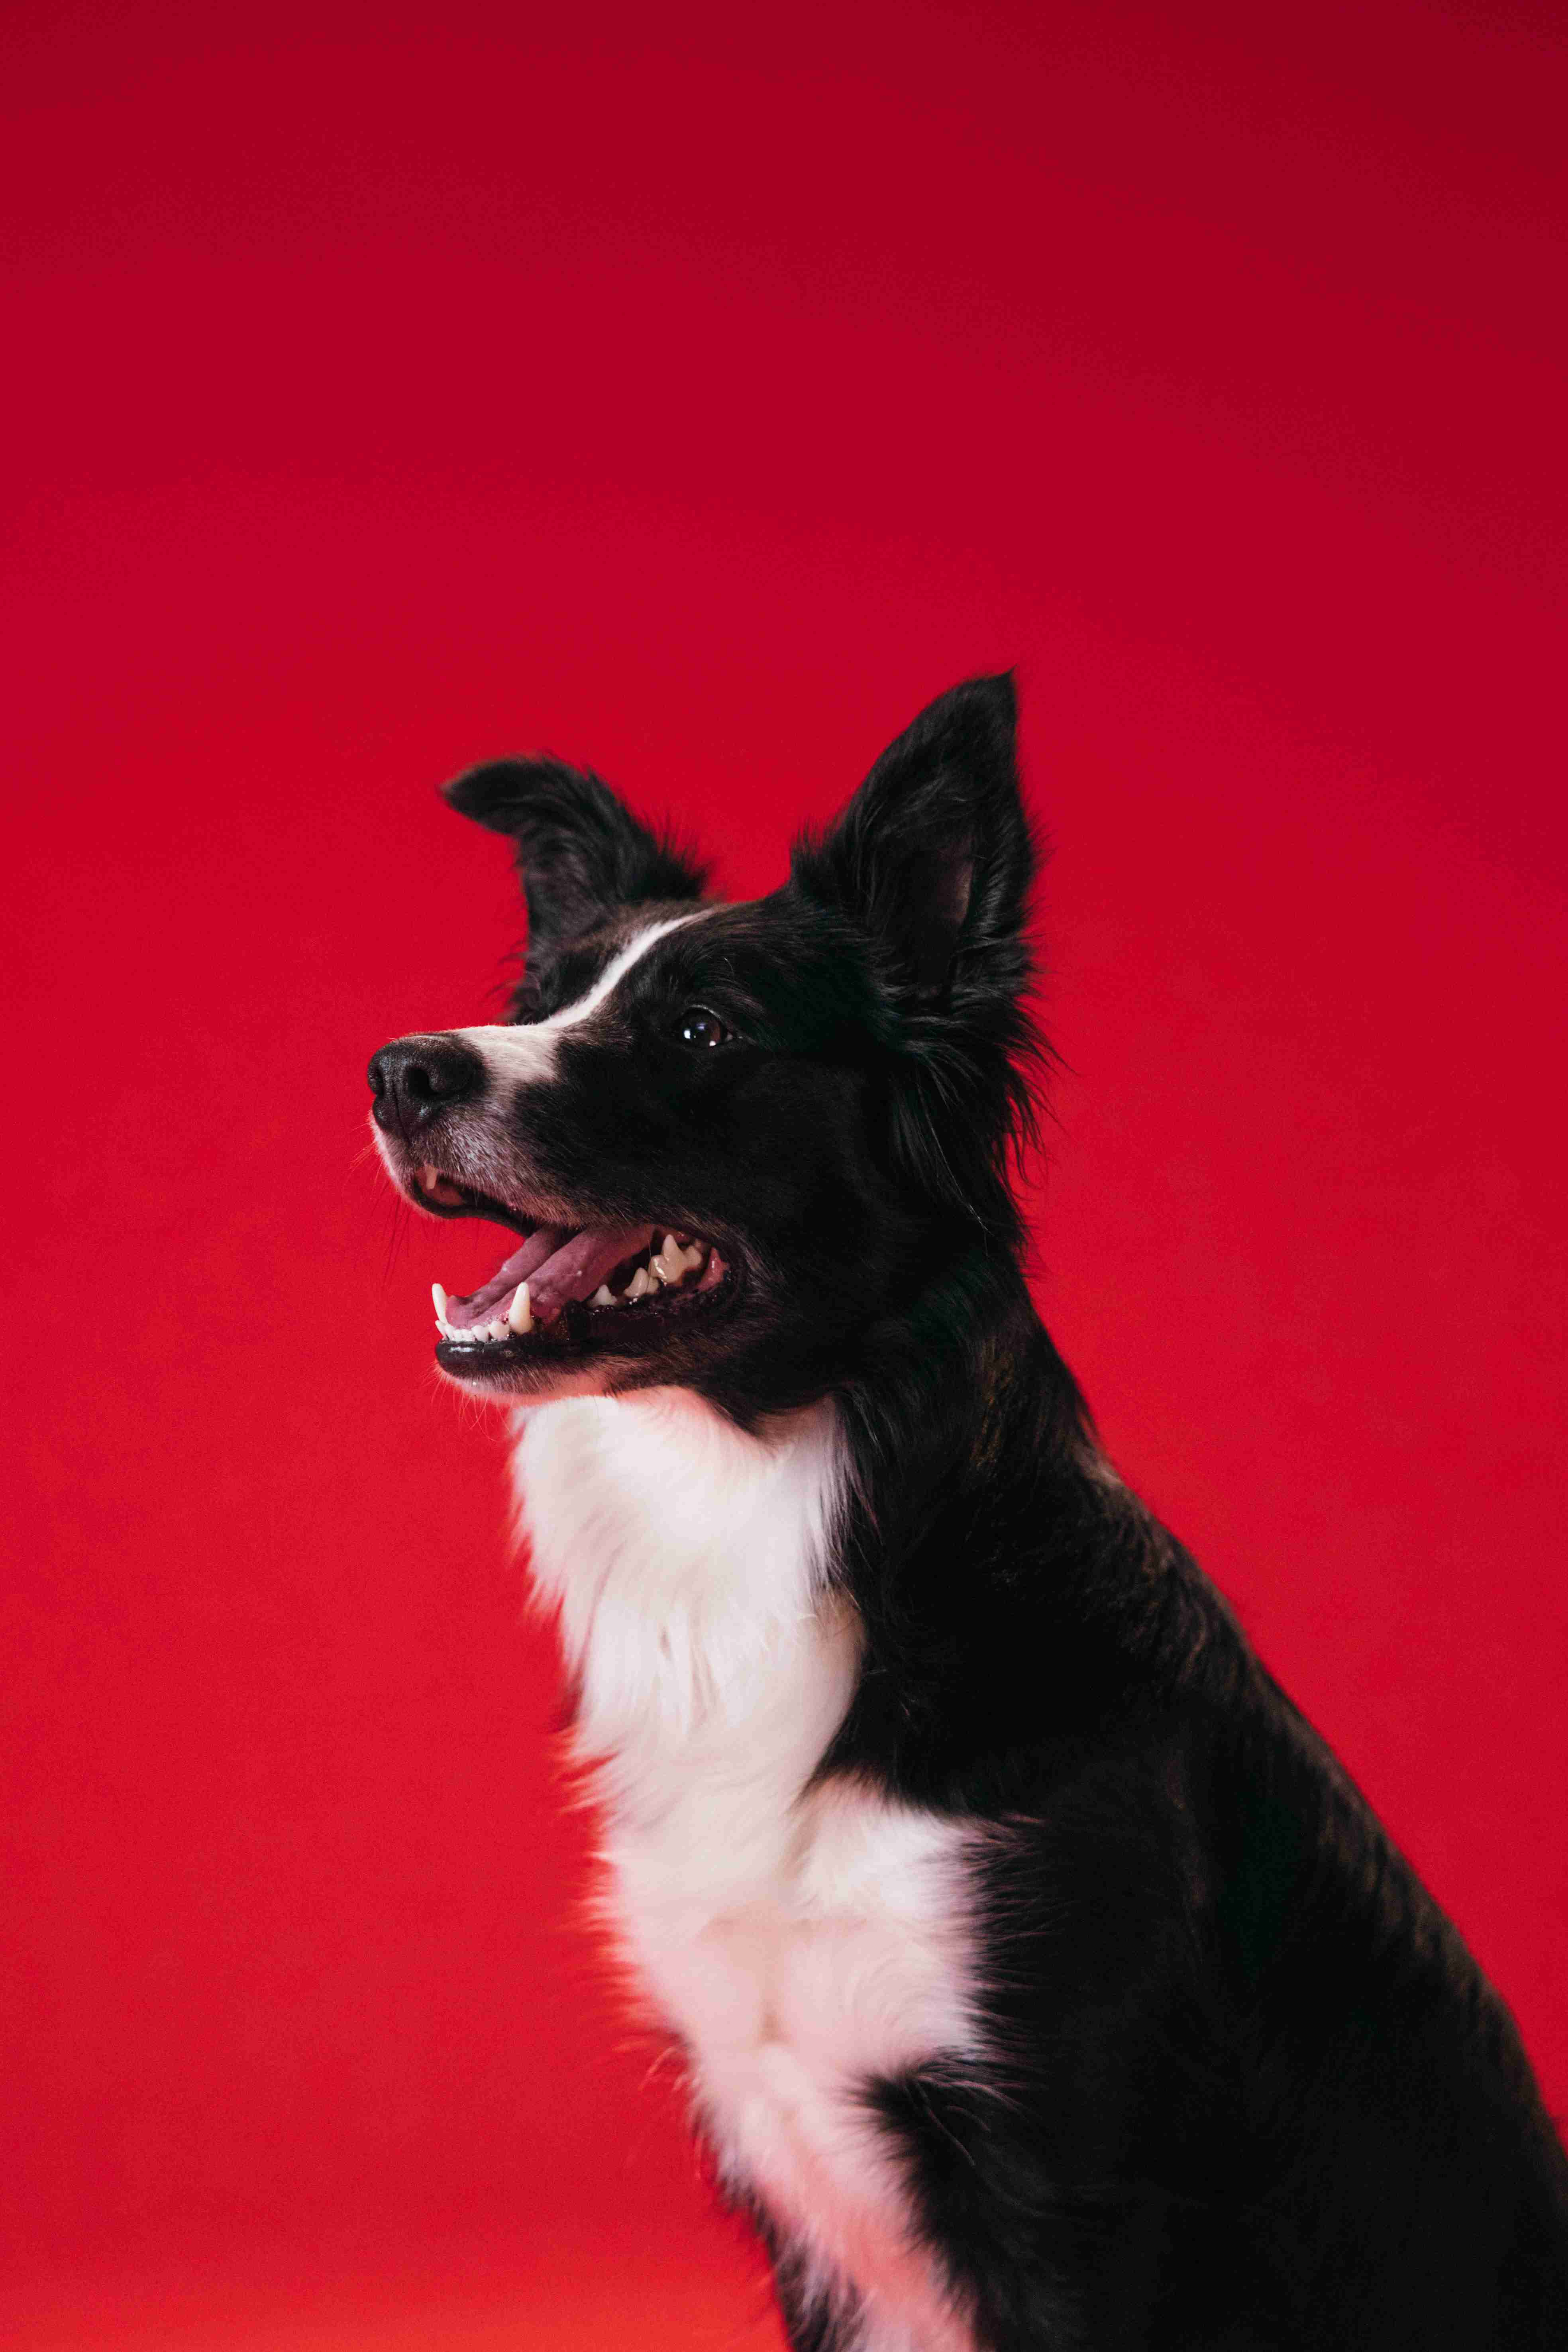 10 Common Health Issues Border Collies are Prone to and How to Prevent Them